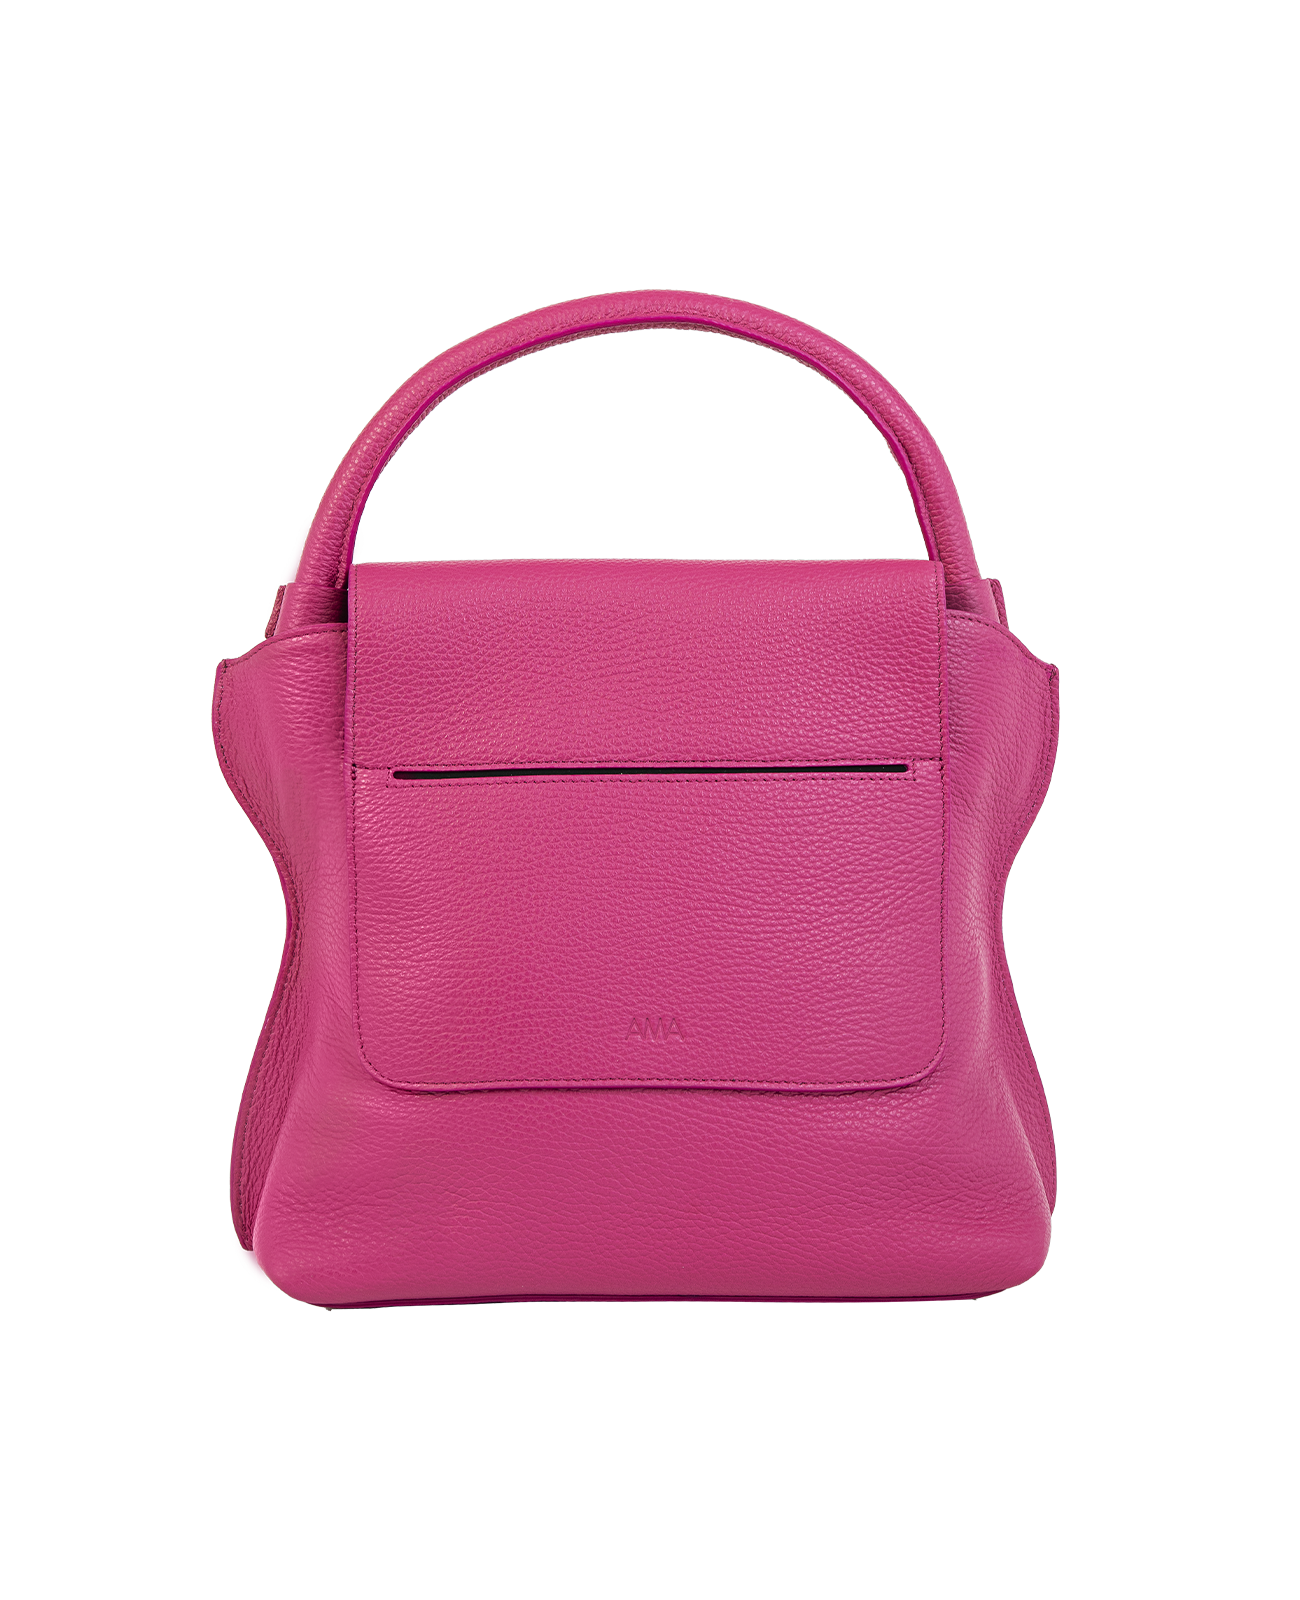 Cross-body bag in Italian full-grain leather, semi-aniline calf Italian leather with detachable shoulder strap.Three compartments, zip pocket in the back compartment. Magnetic flap closure with logo. Color: Pink. Size:Large